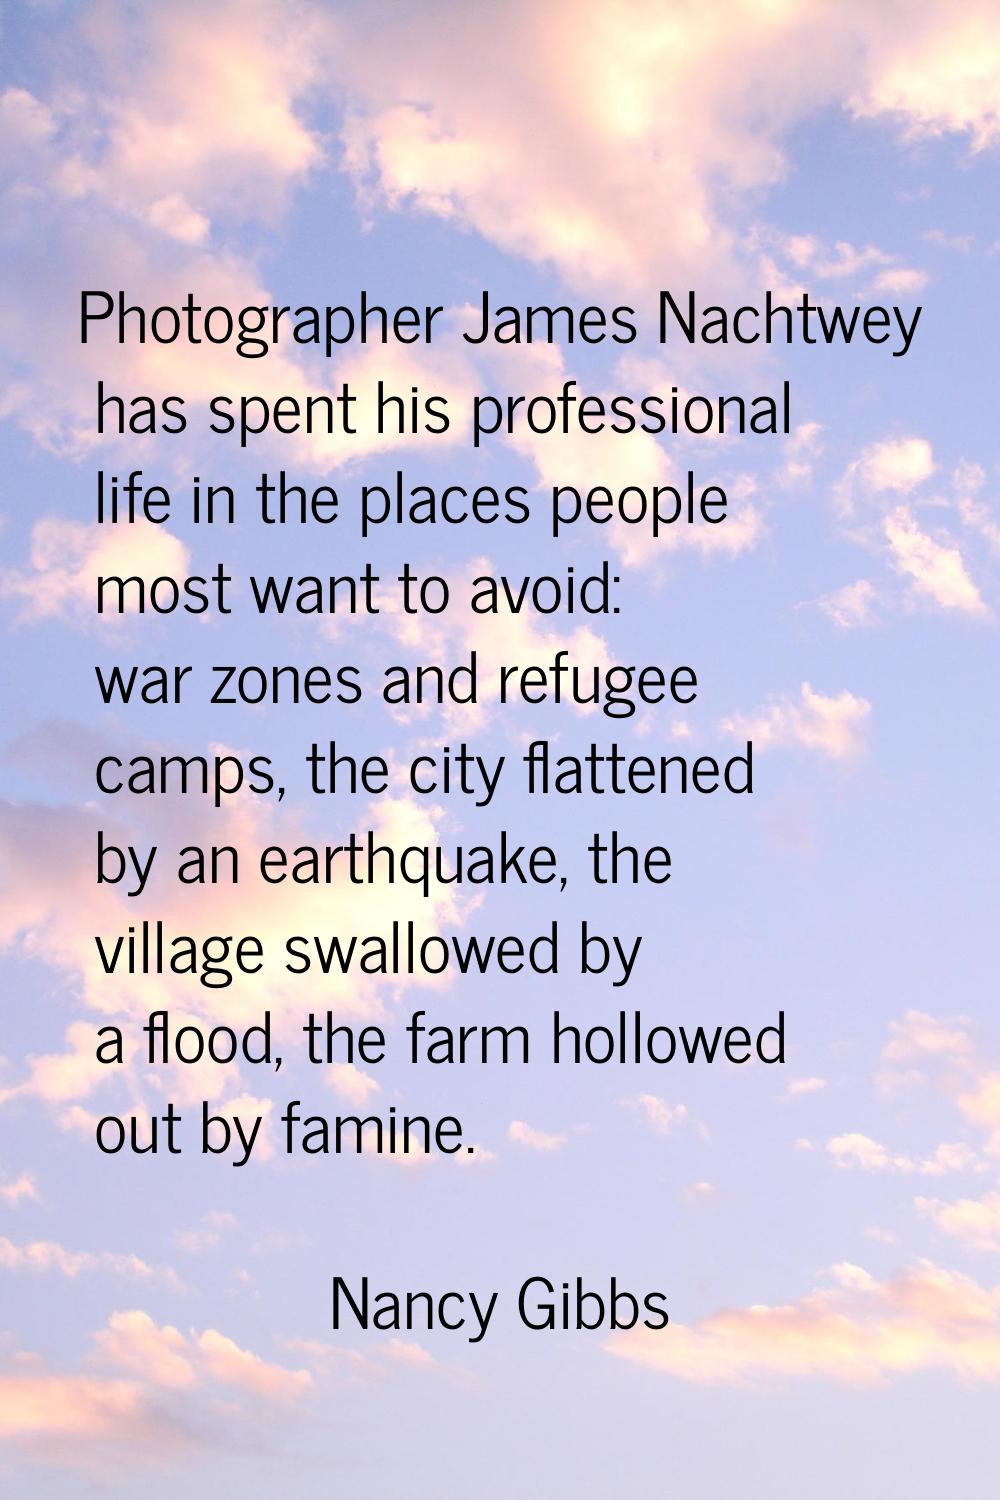 Photographer James Nachtwey has spent his professional life in the places people most want to avoid